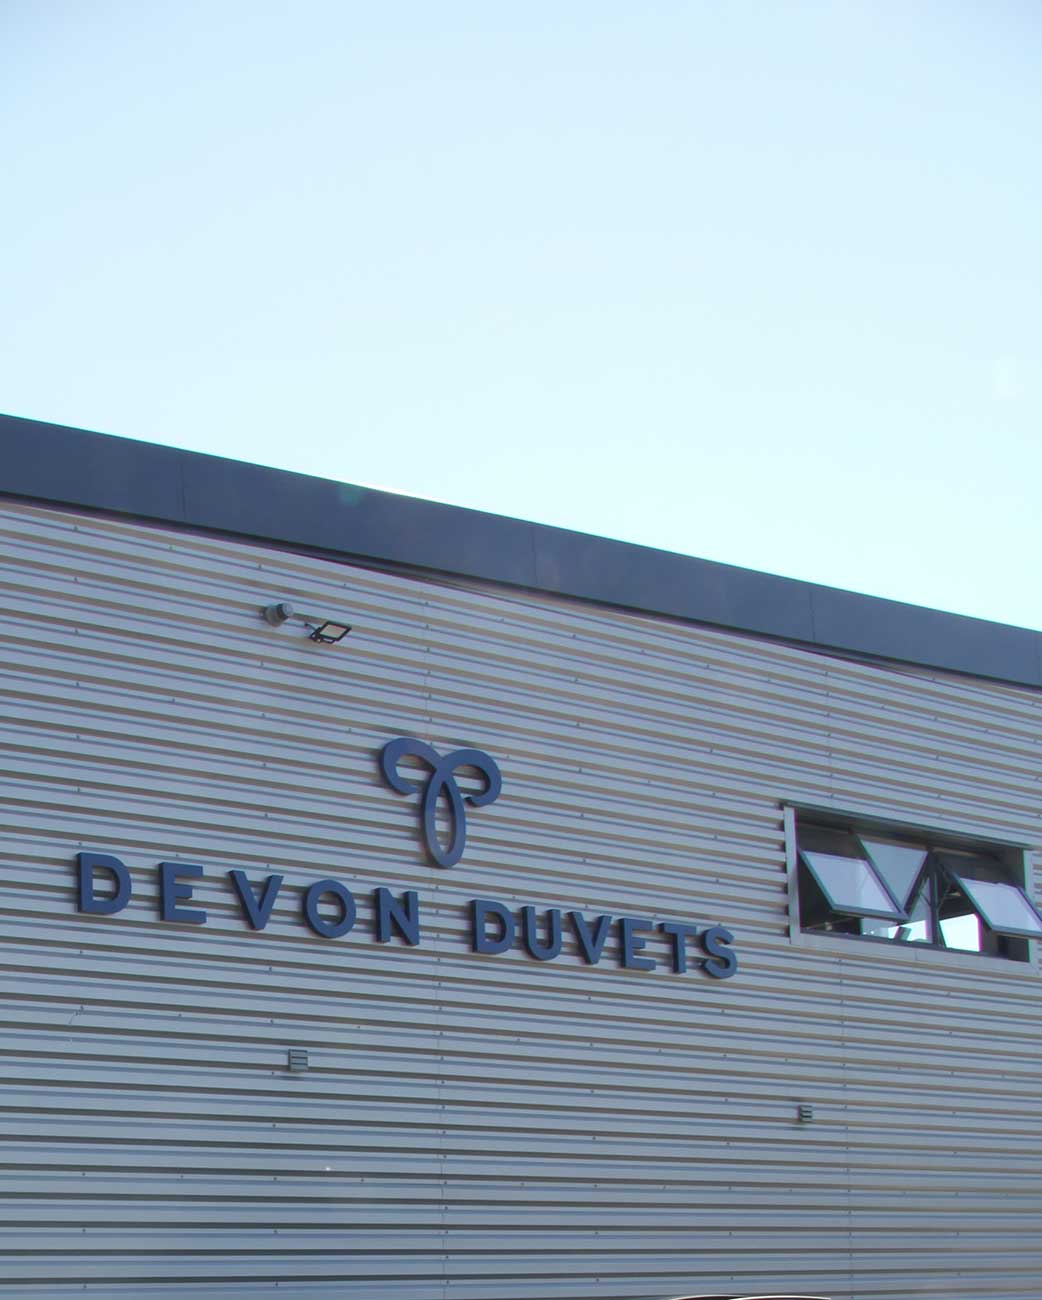 Purpose-built, energy-efficient Devon Duvets workshop where luxury bedding products are handcrafted.